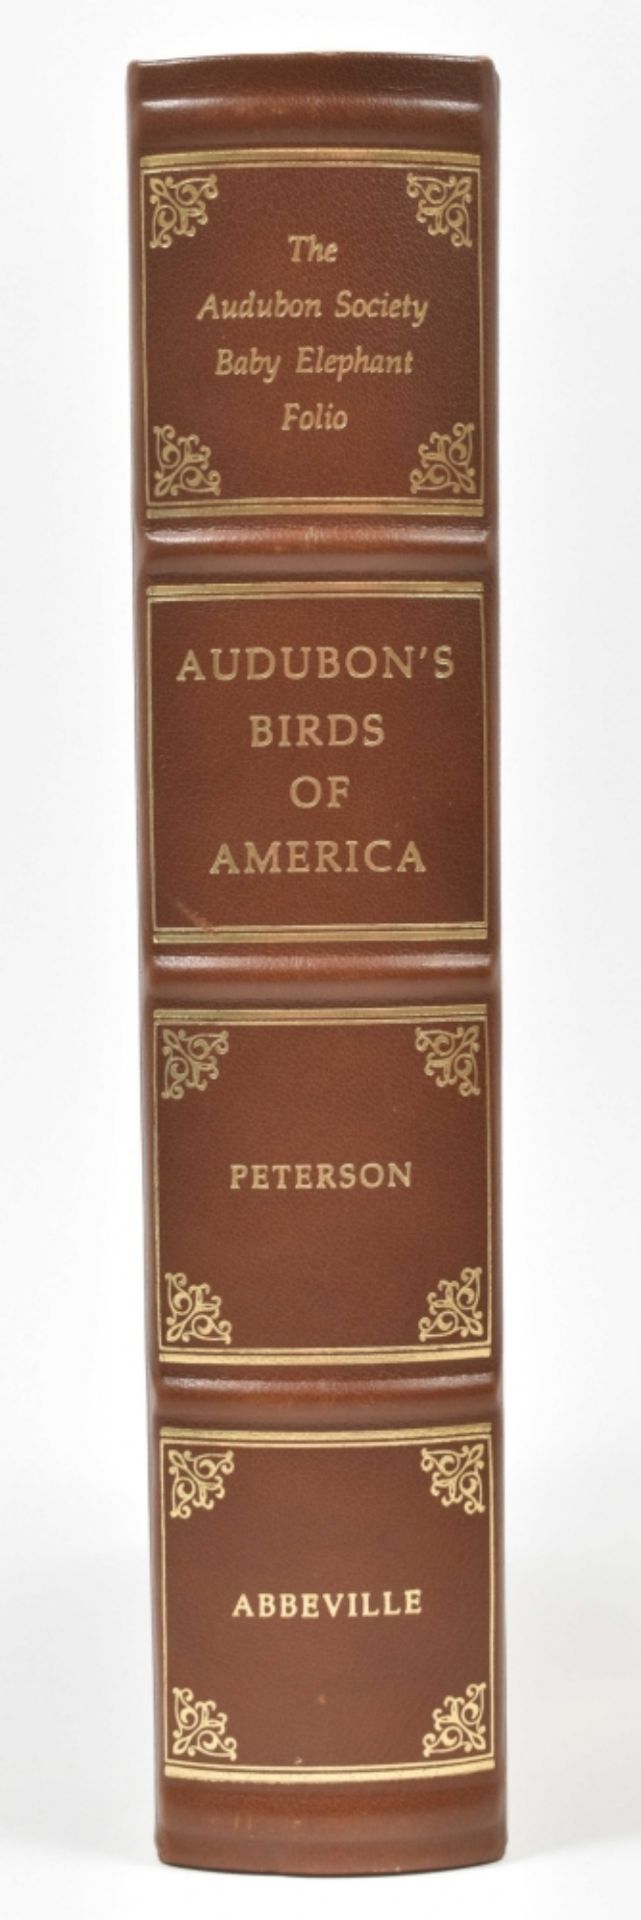 R. and V. Peterson. Audubon's Birds of America - Image 2 of 6